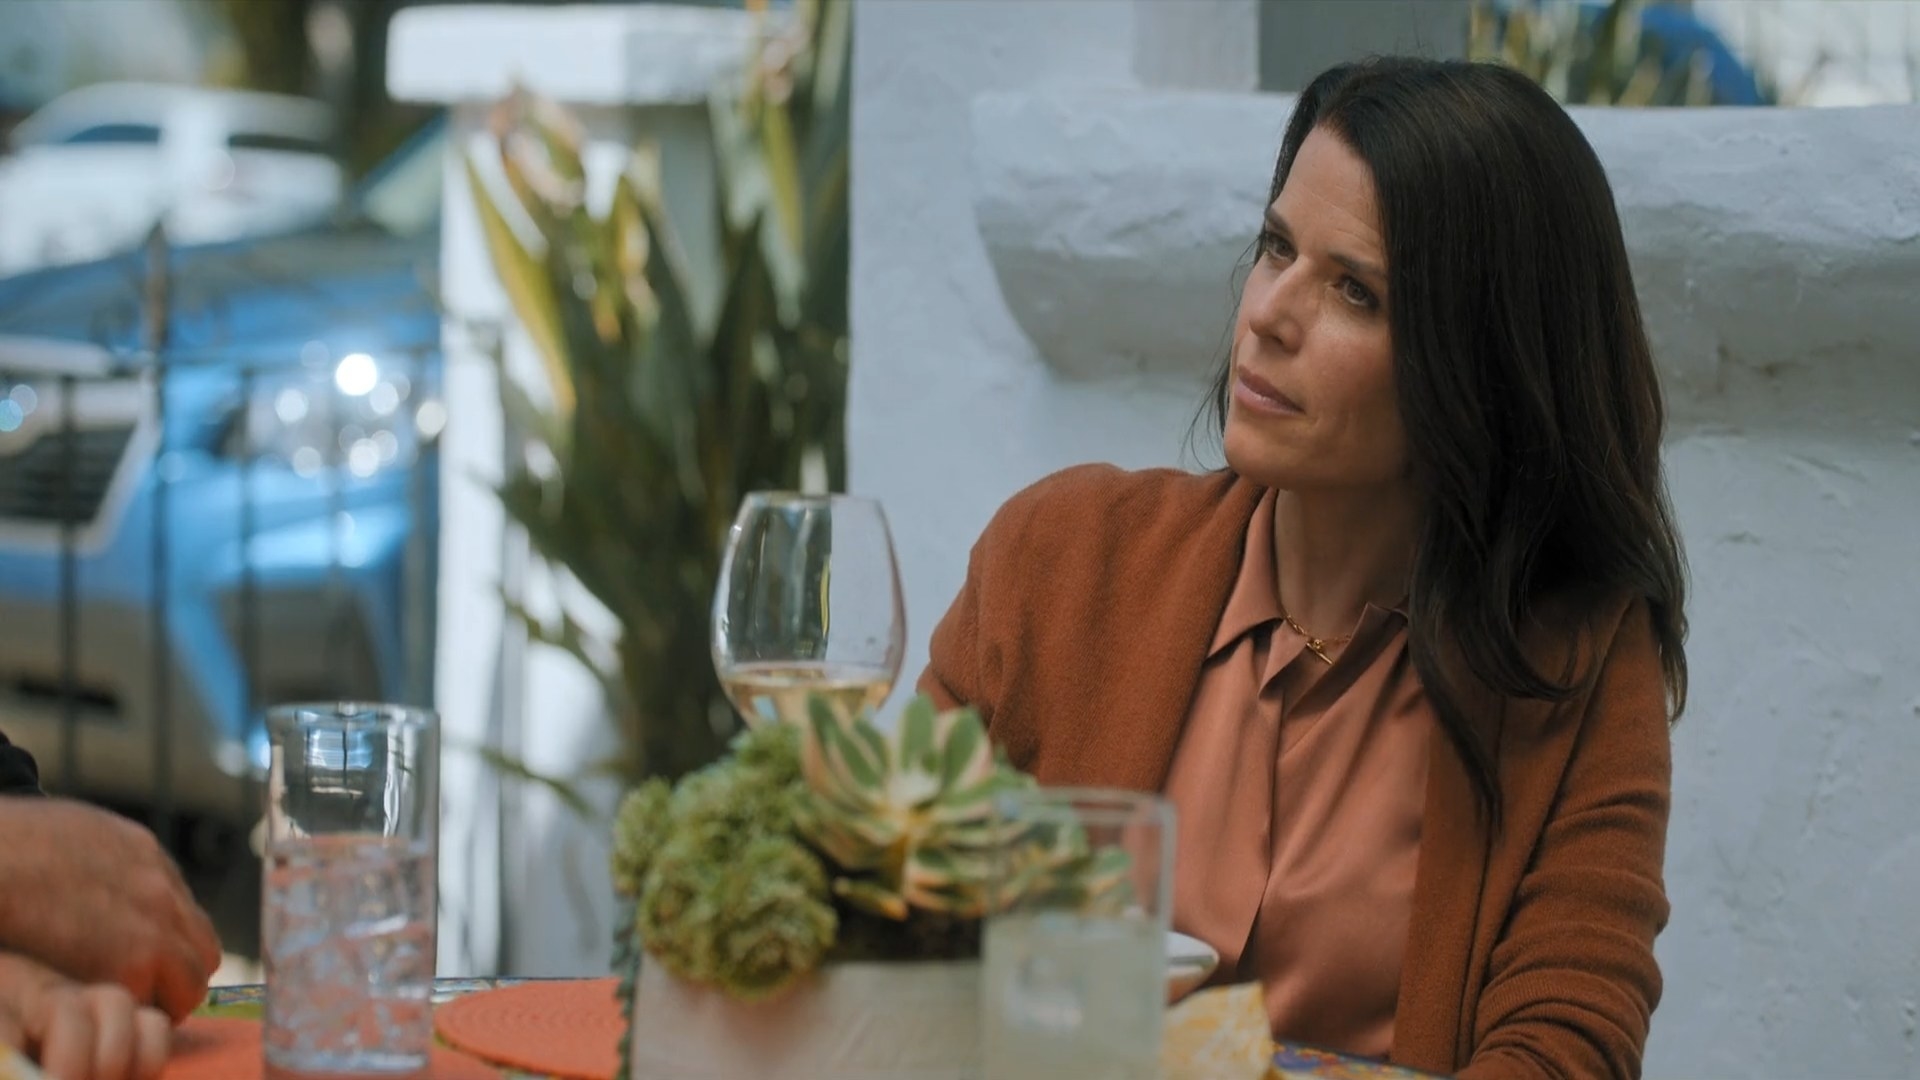 Neve Campbell talks to someone